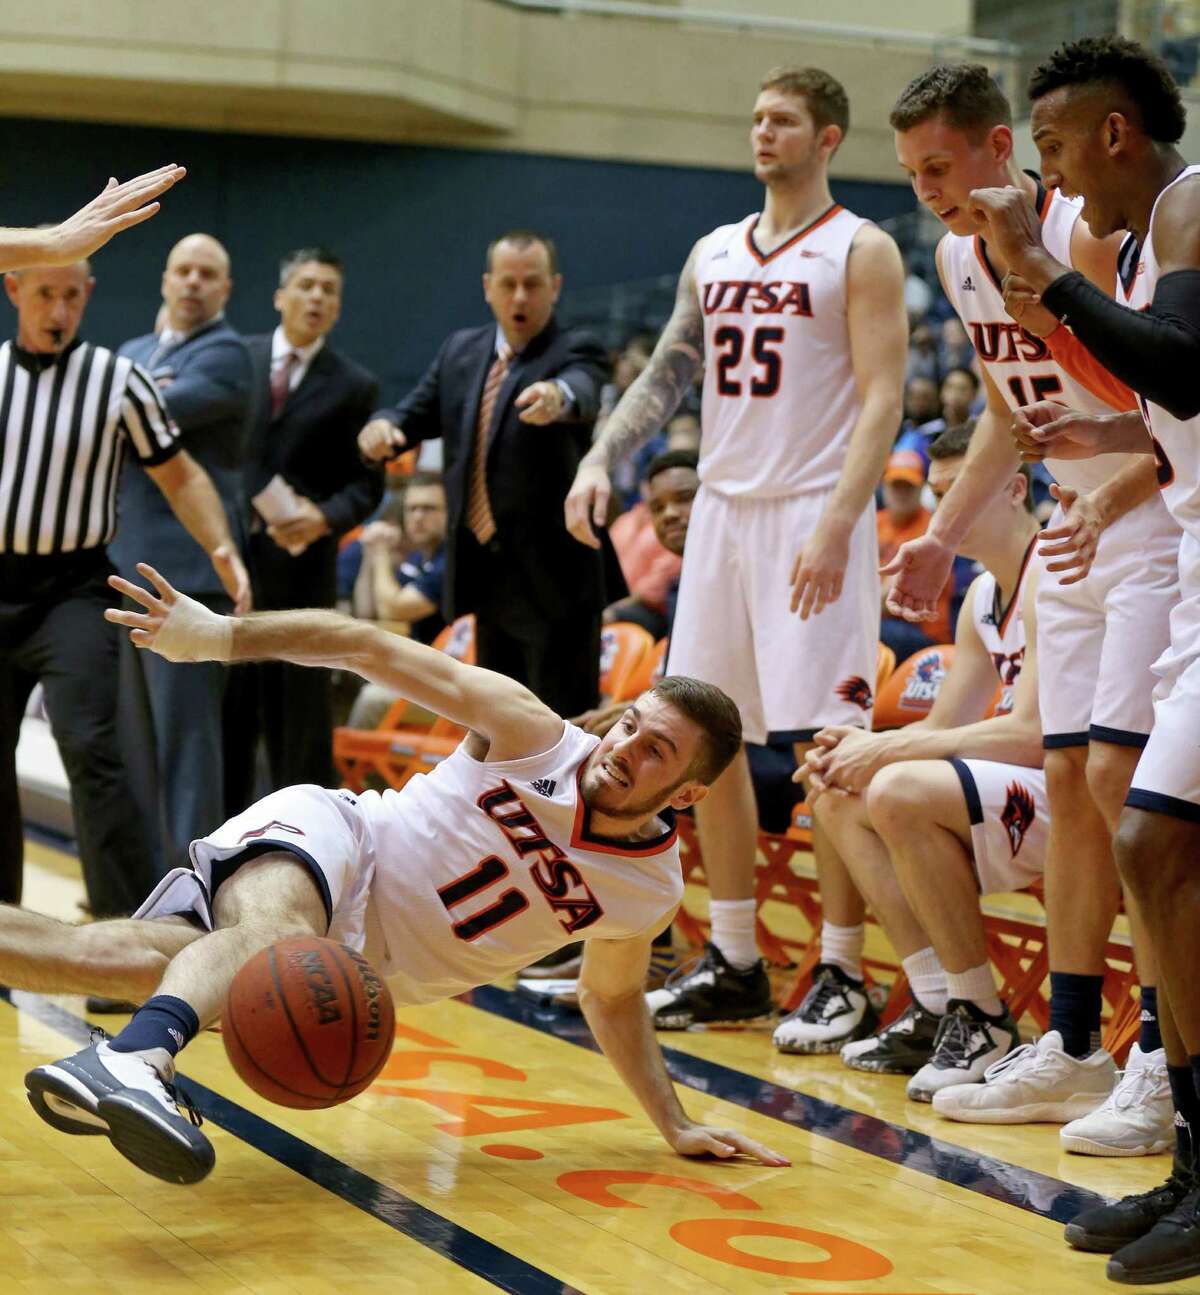 UTSA’s Austin Karrer chases after a loose ball during second half action against UTEP on Jan. 1, 2017 at the Convocation Center.